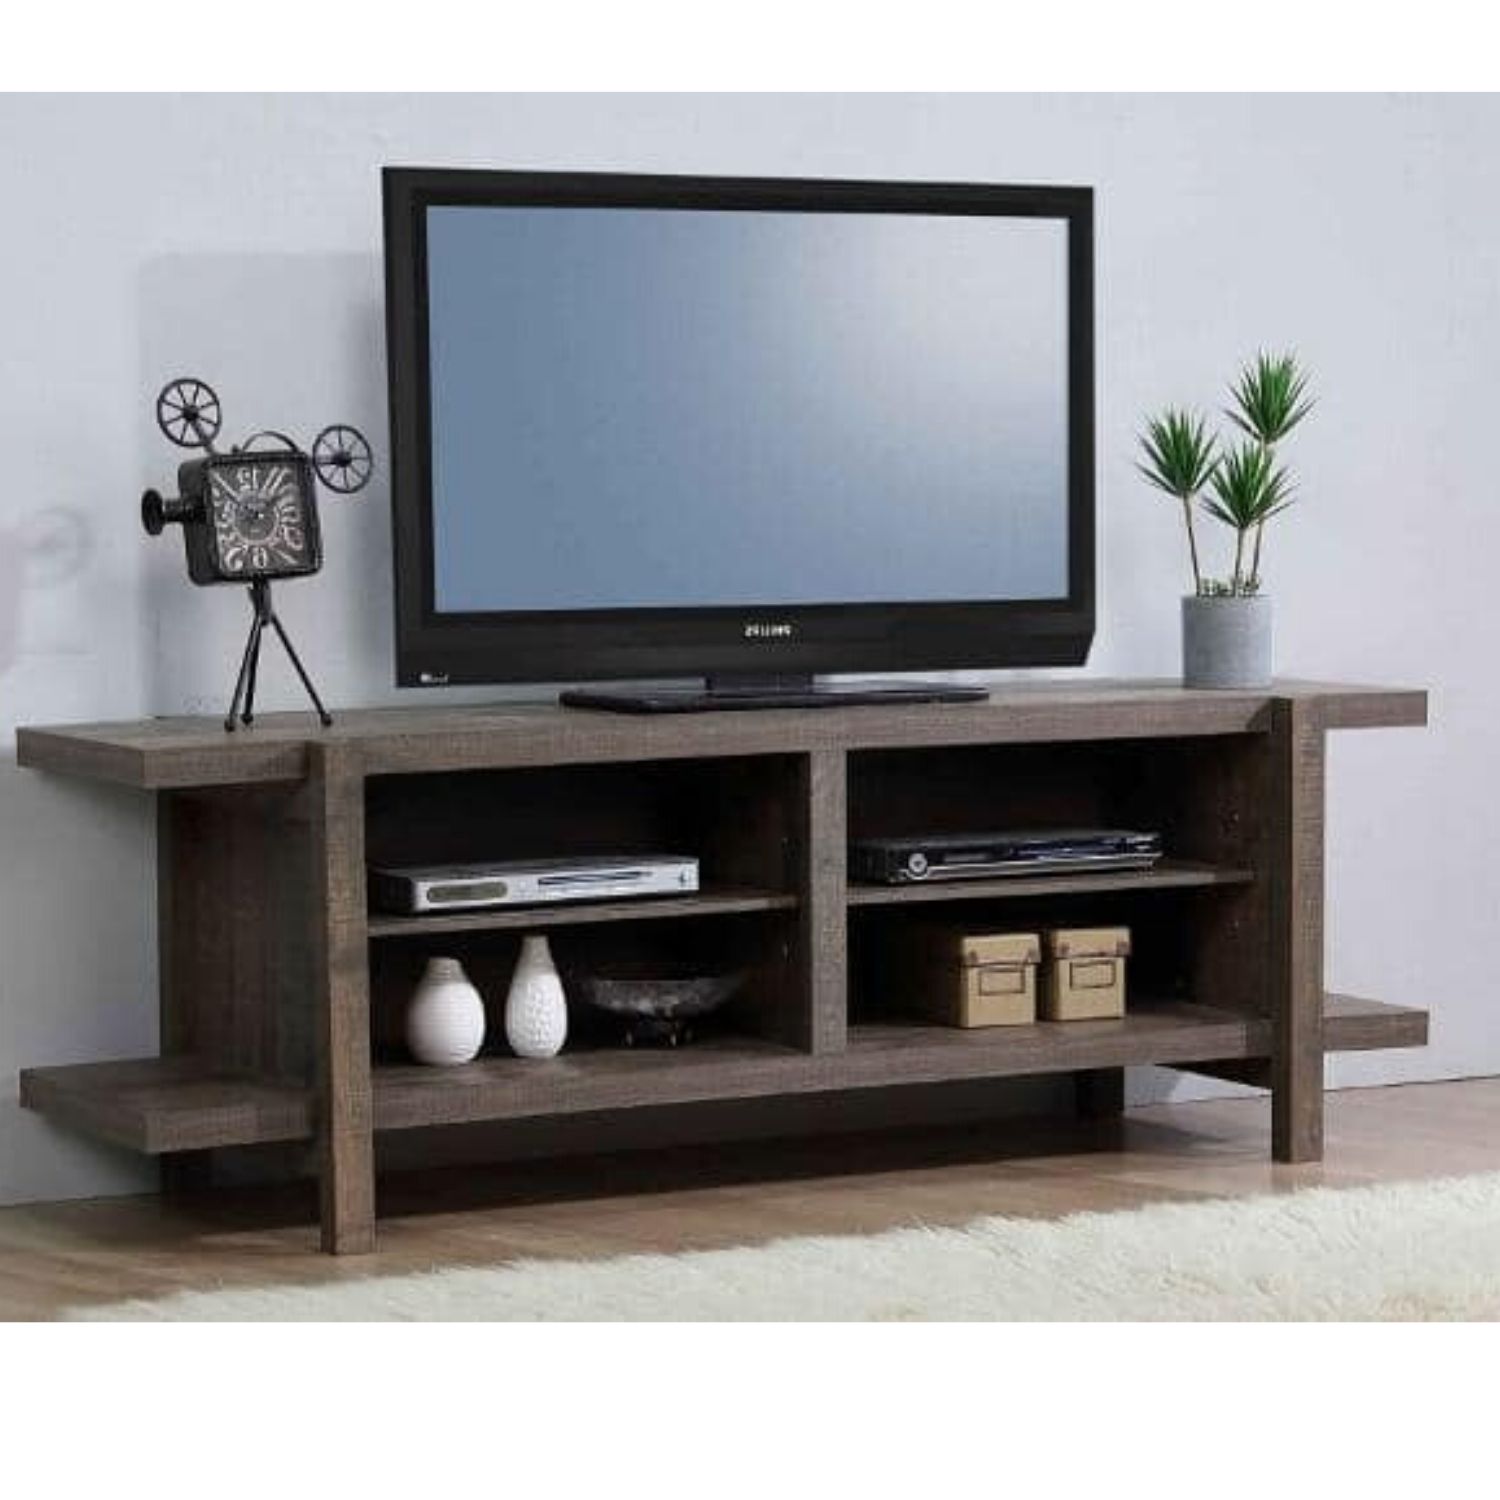 Tammy 65'' Tv Stand For Tvs Up To 70'', Rustic Mdf Wood Tv With Regard To Caleah Tv Stands For Tvs Up To 65&quot; (Gallery 17 of 20)